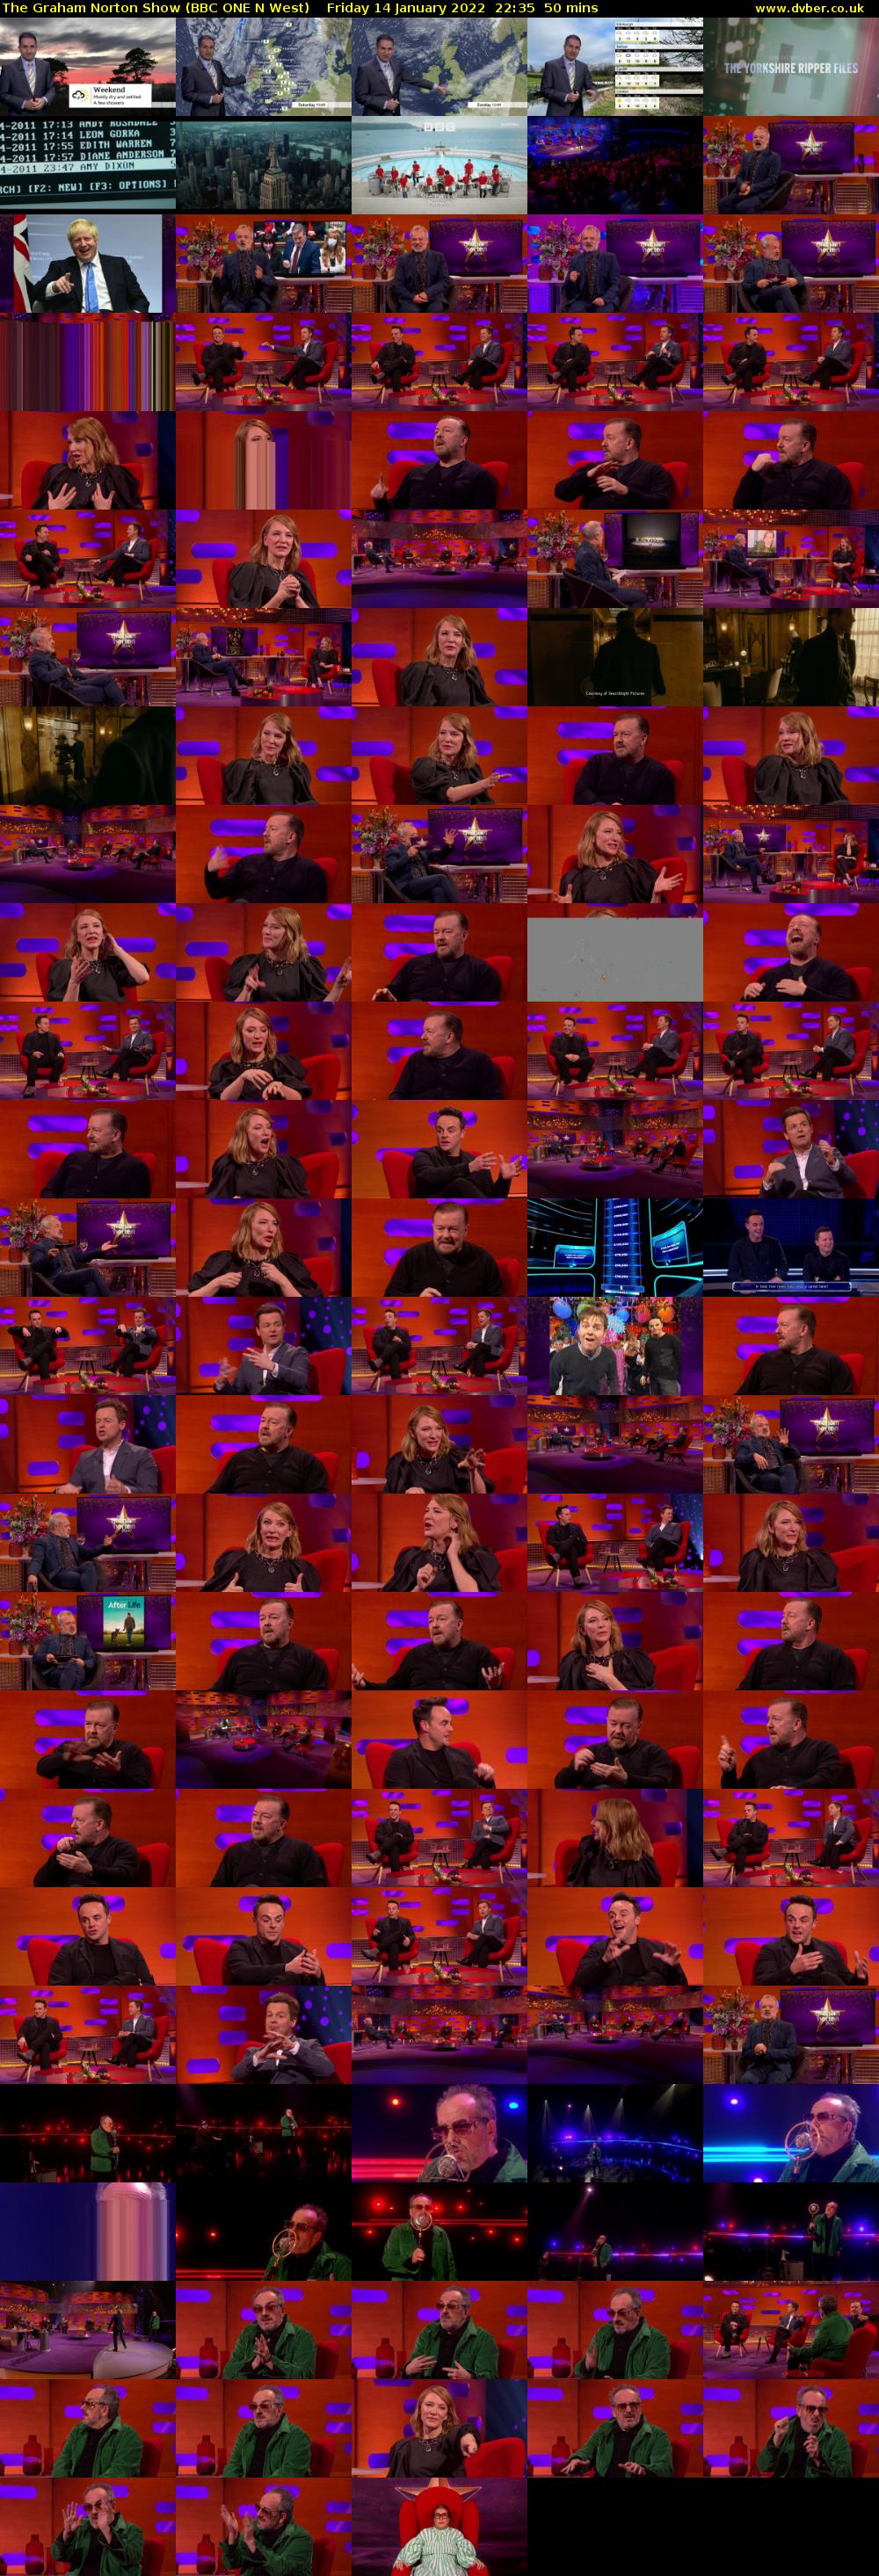 The Graham Norton Show (BBC ONE N West) Friday 14 January 2022 22:35 - 23:25